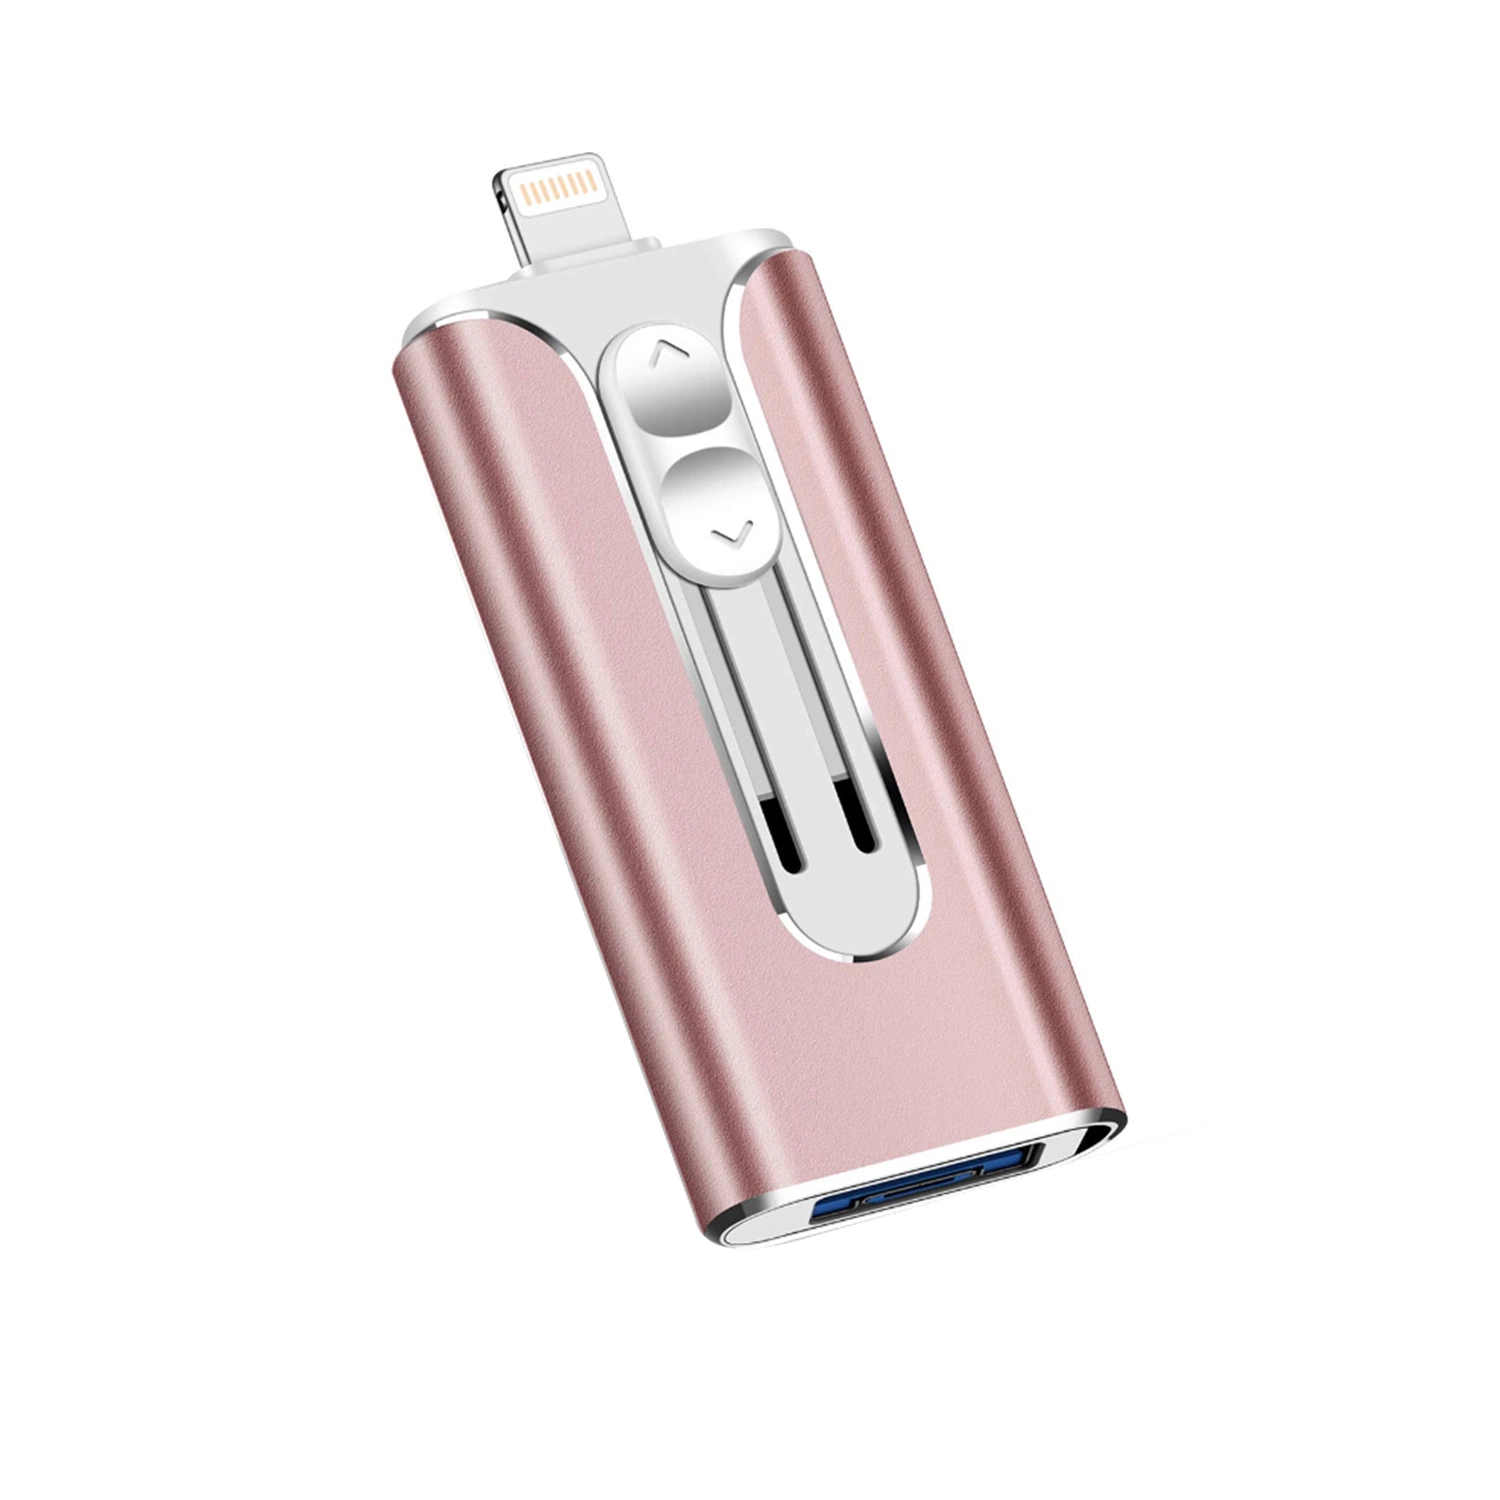 USB 3.0 Flash Drive 3 in 1 Mobile Phone U Disk for iPhone Android Promotional Gift Custom Logo